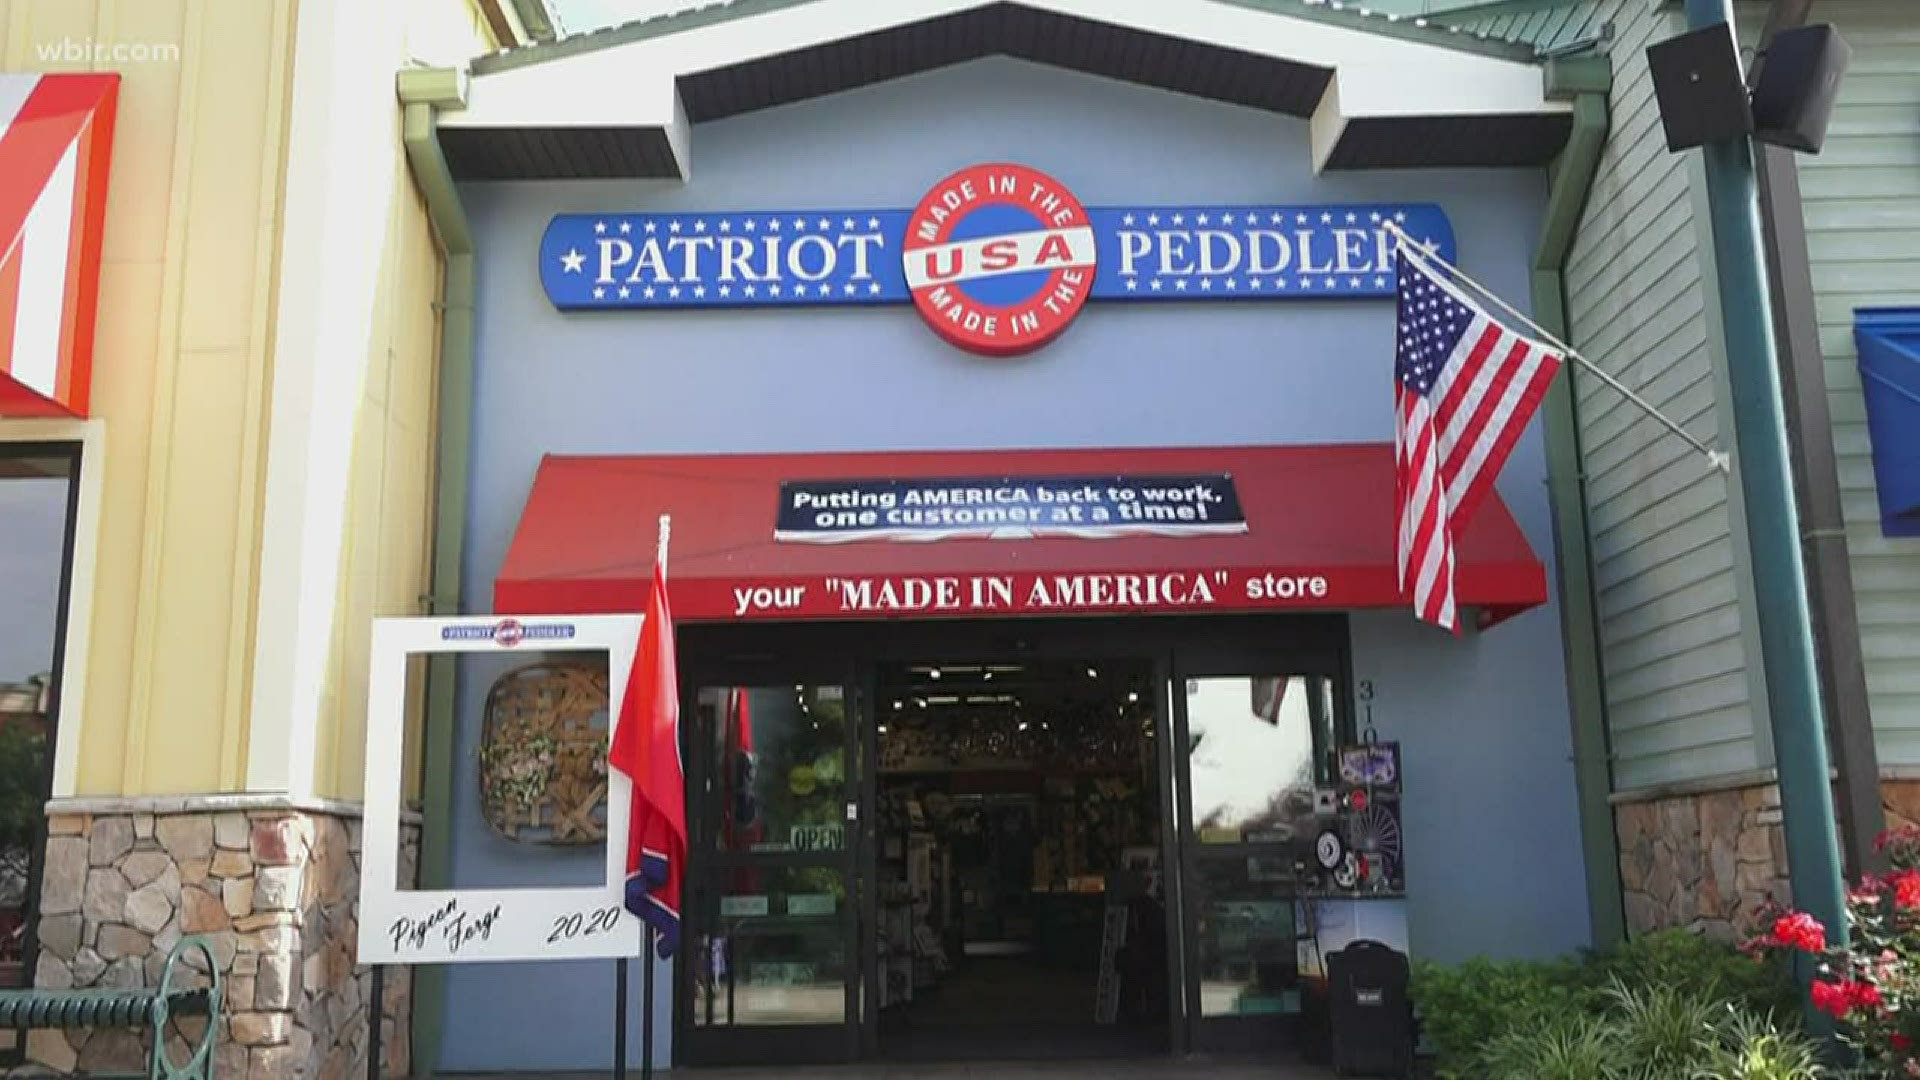 The Patriot Peddler has collected more than 2,000 pictures from its customers